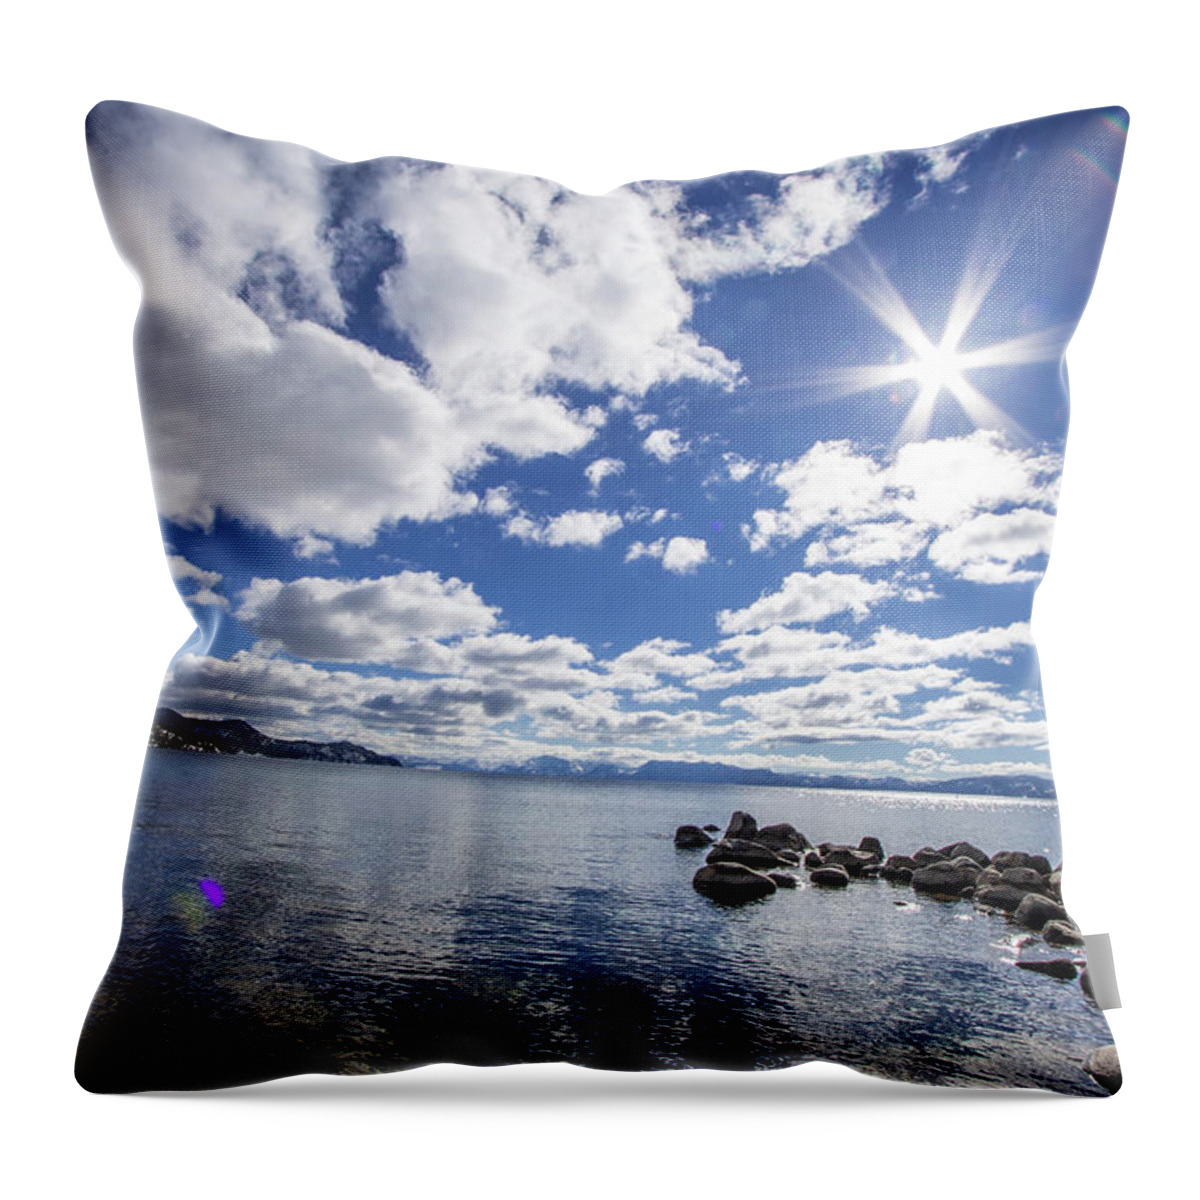 Lake Tahoe Water Throw Pillow featuring the photograph Lake Tahoe 3 by Rocco Silvestri